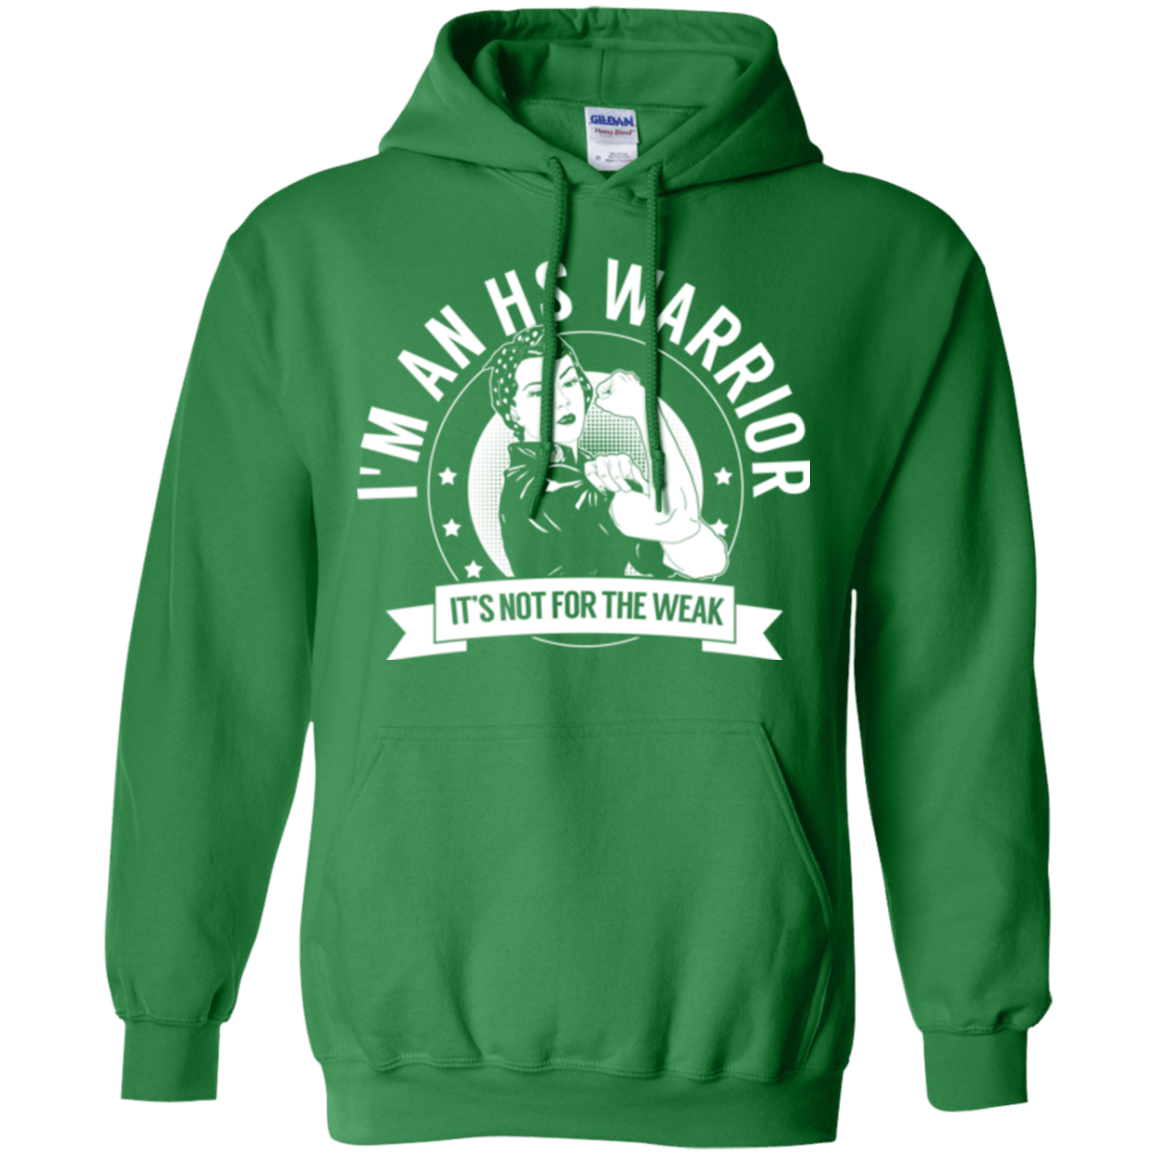 Hidradenitis Suppurativa - HS Warrior Not For The Weak Pullover Hoodie 8 oz. - The Unchargeables